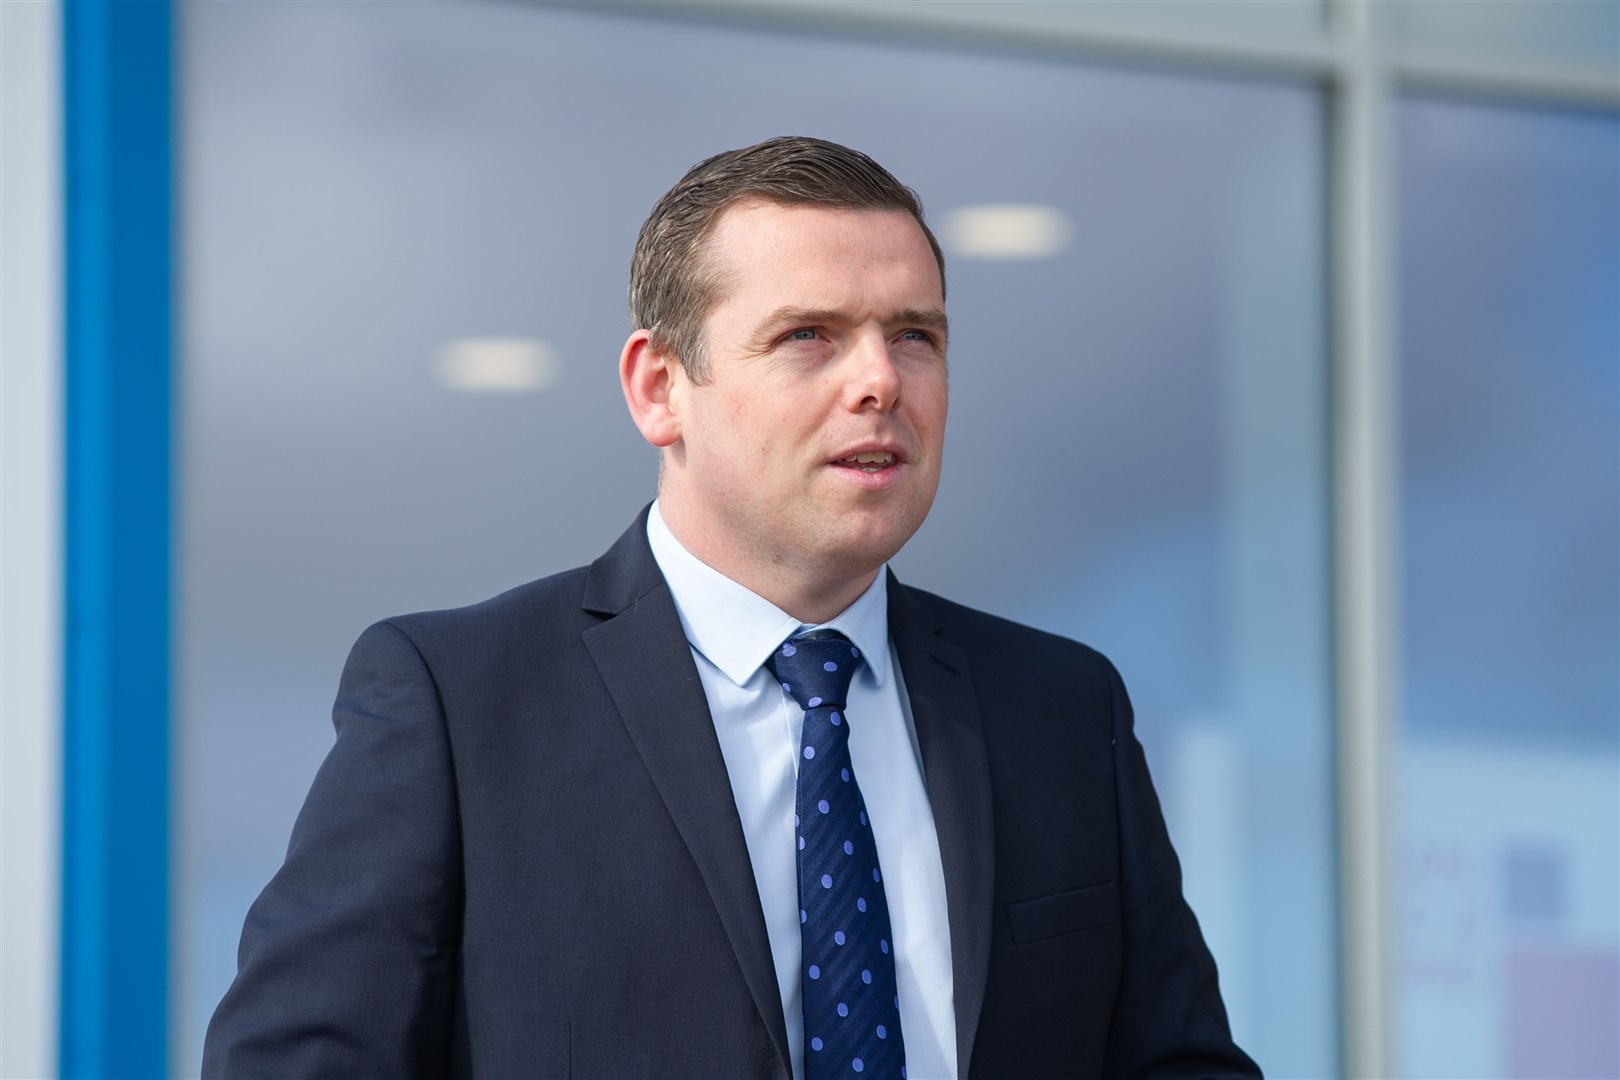 Moray MP Douglas Ross has spent nearly 4000 hours working in additional roles since December 2019. Picture: Daniel Forsyth